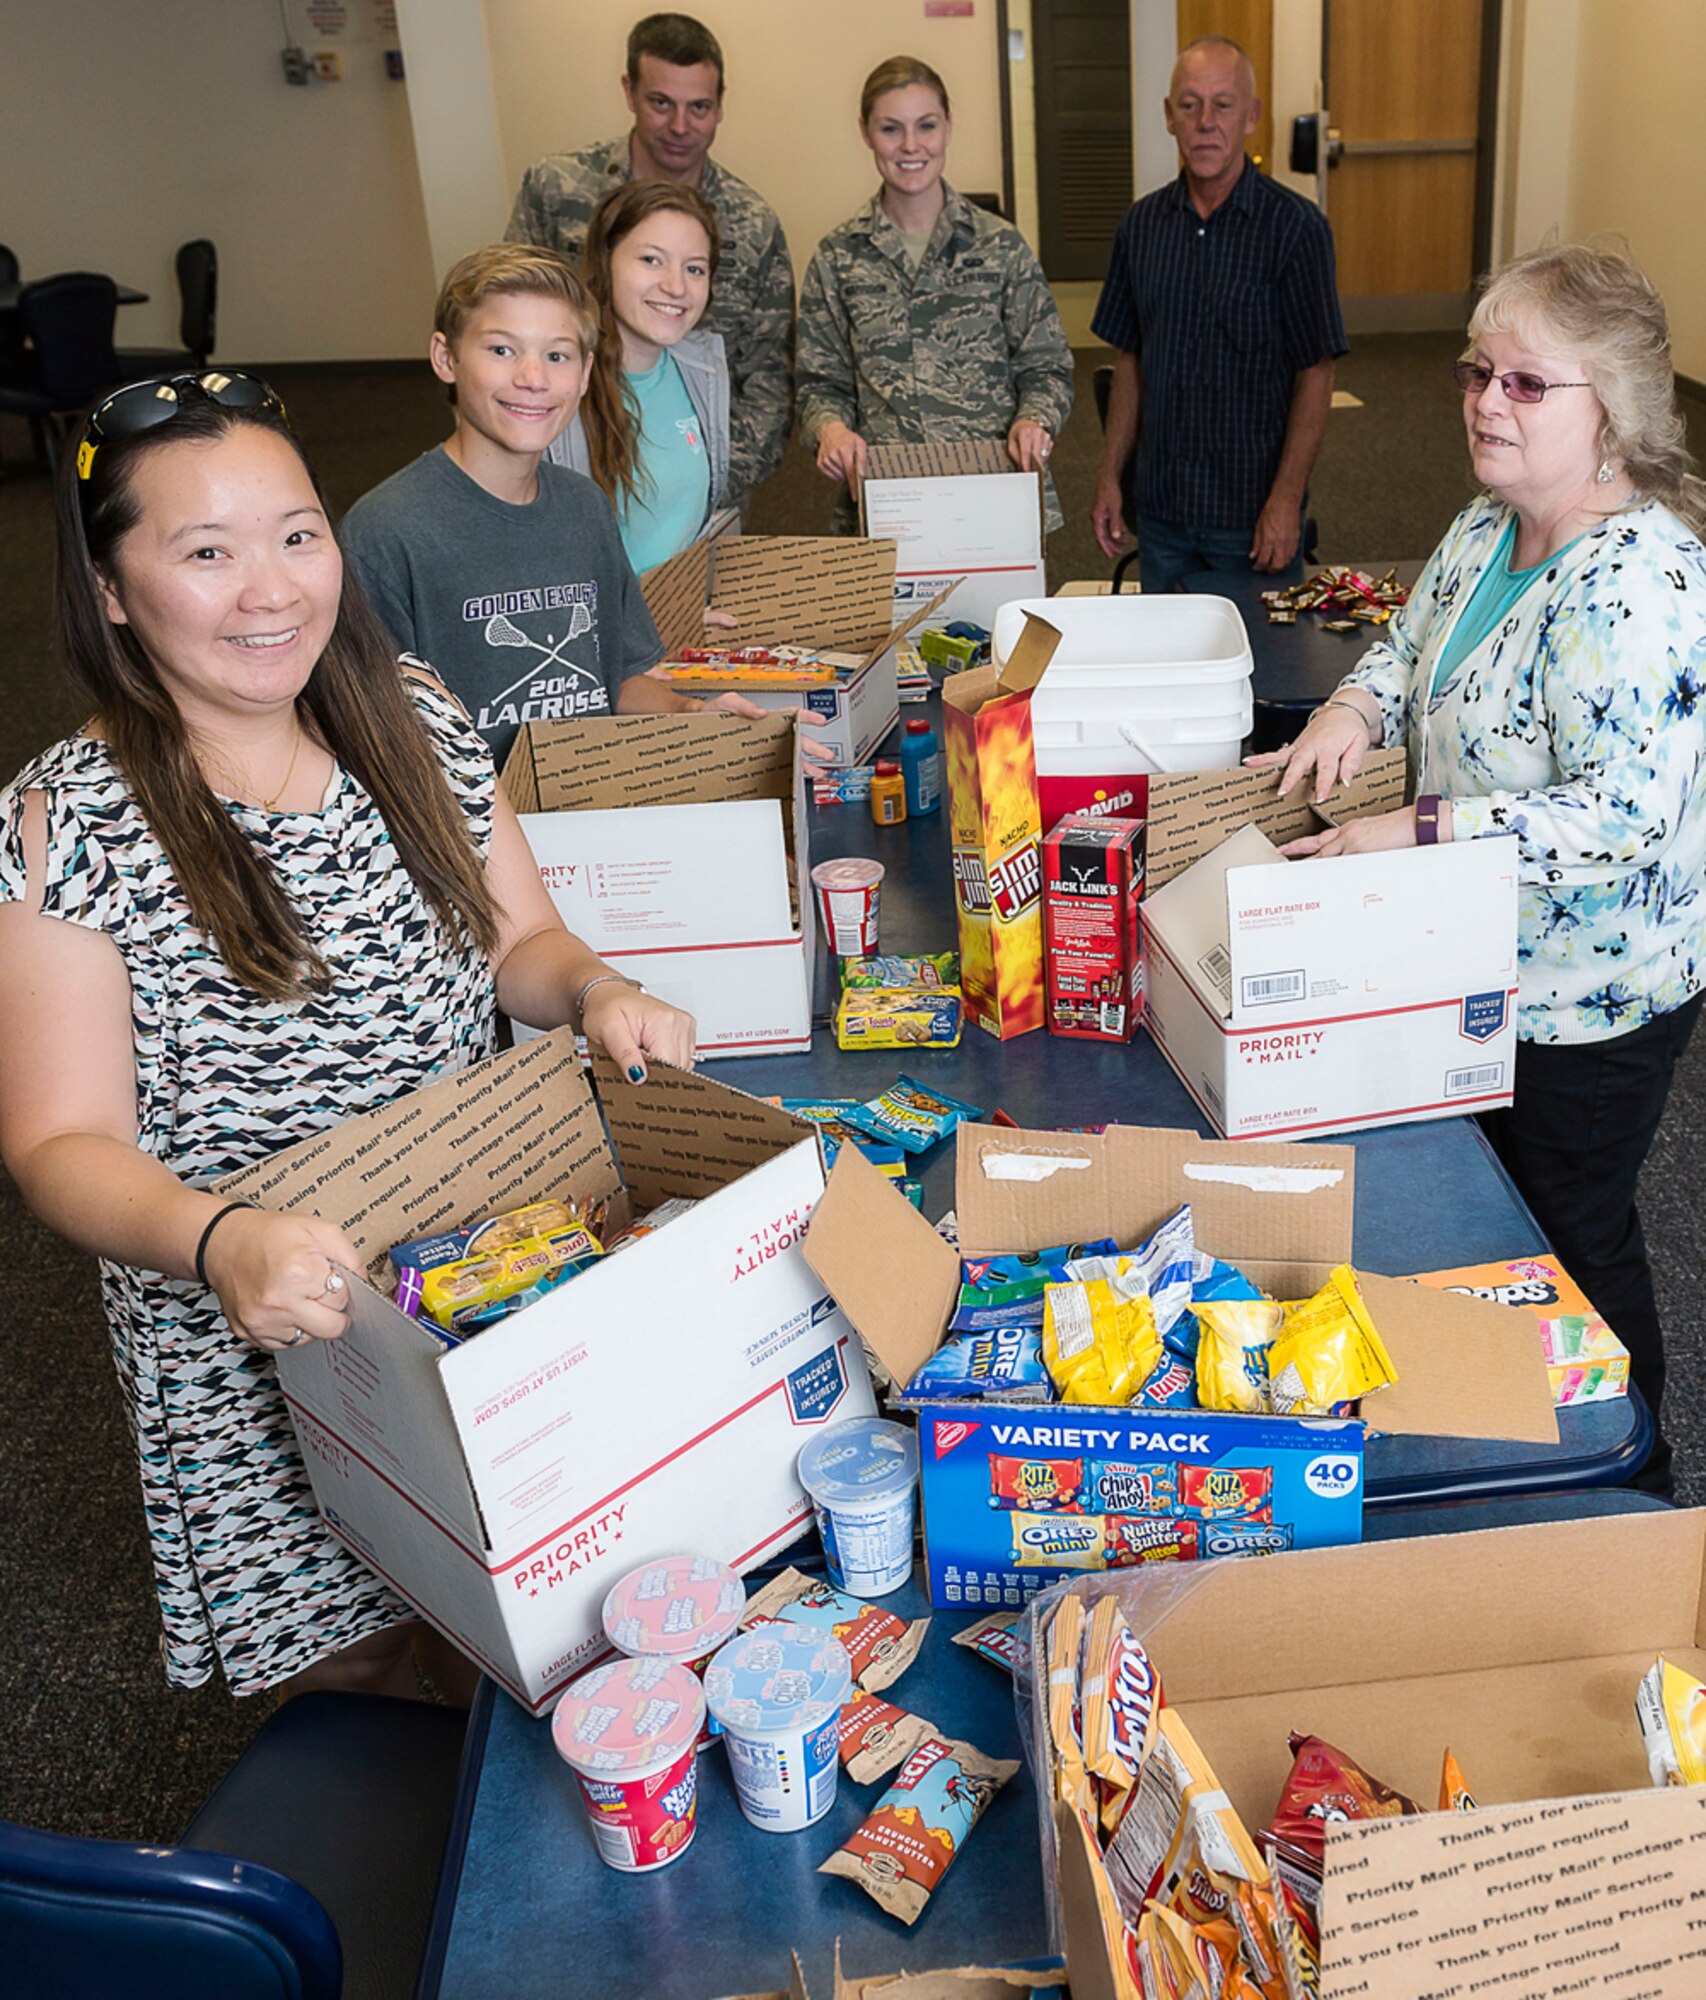 Key spouses and their family members, along with staff from Air Force Research Laboratory’s Operations Support Office, assemble care packages for 20 deployed AFRL team members. (U.S. Air Force photo / Alaina Fitzner)